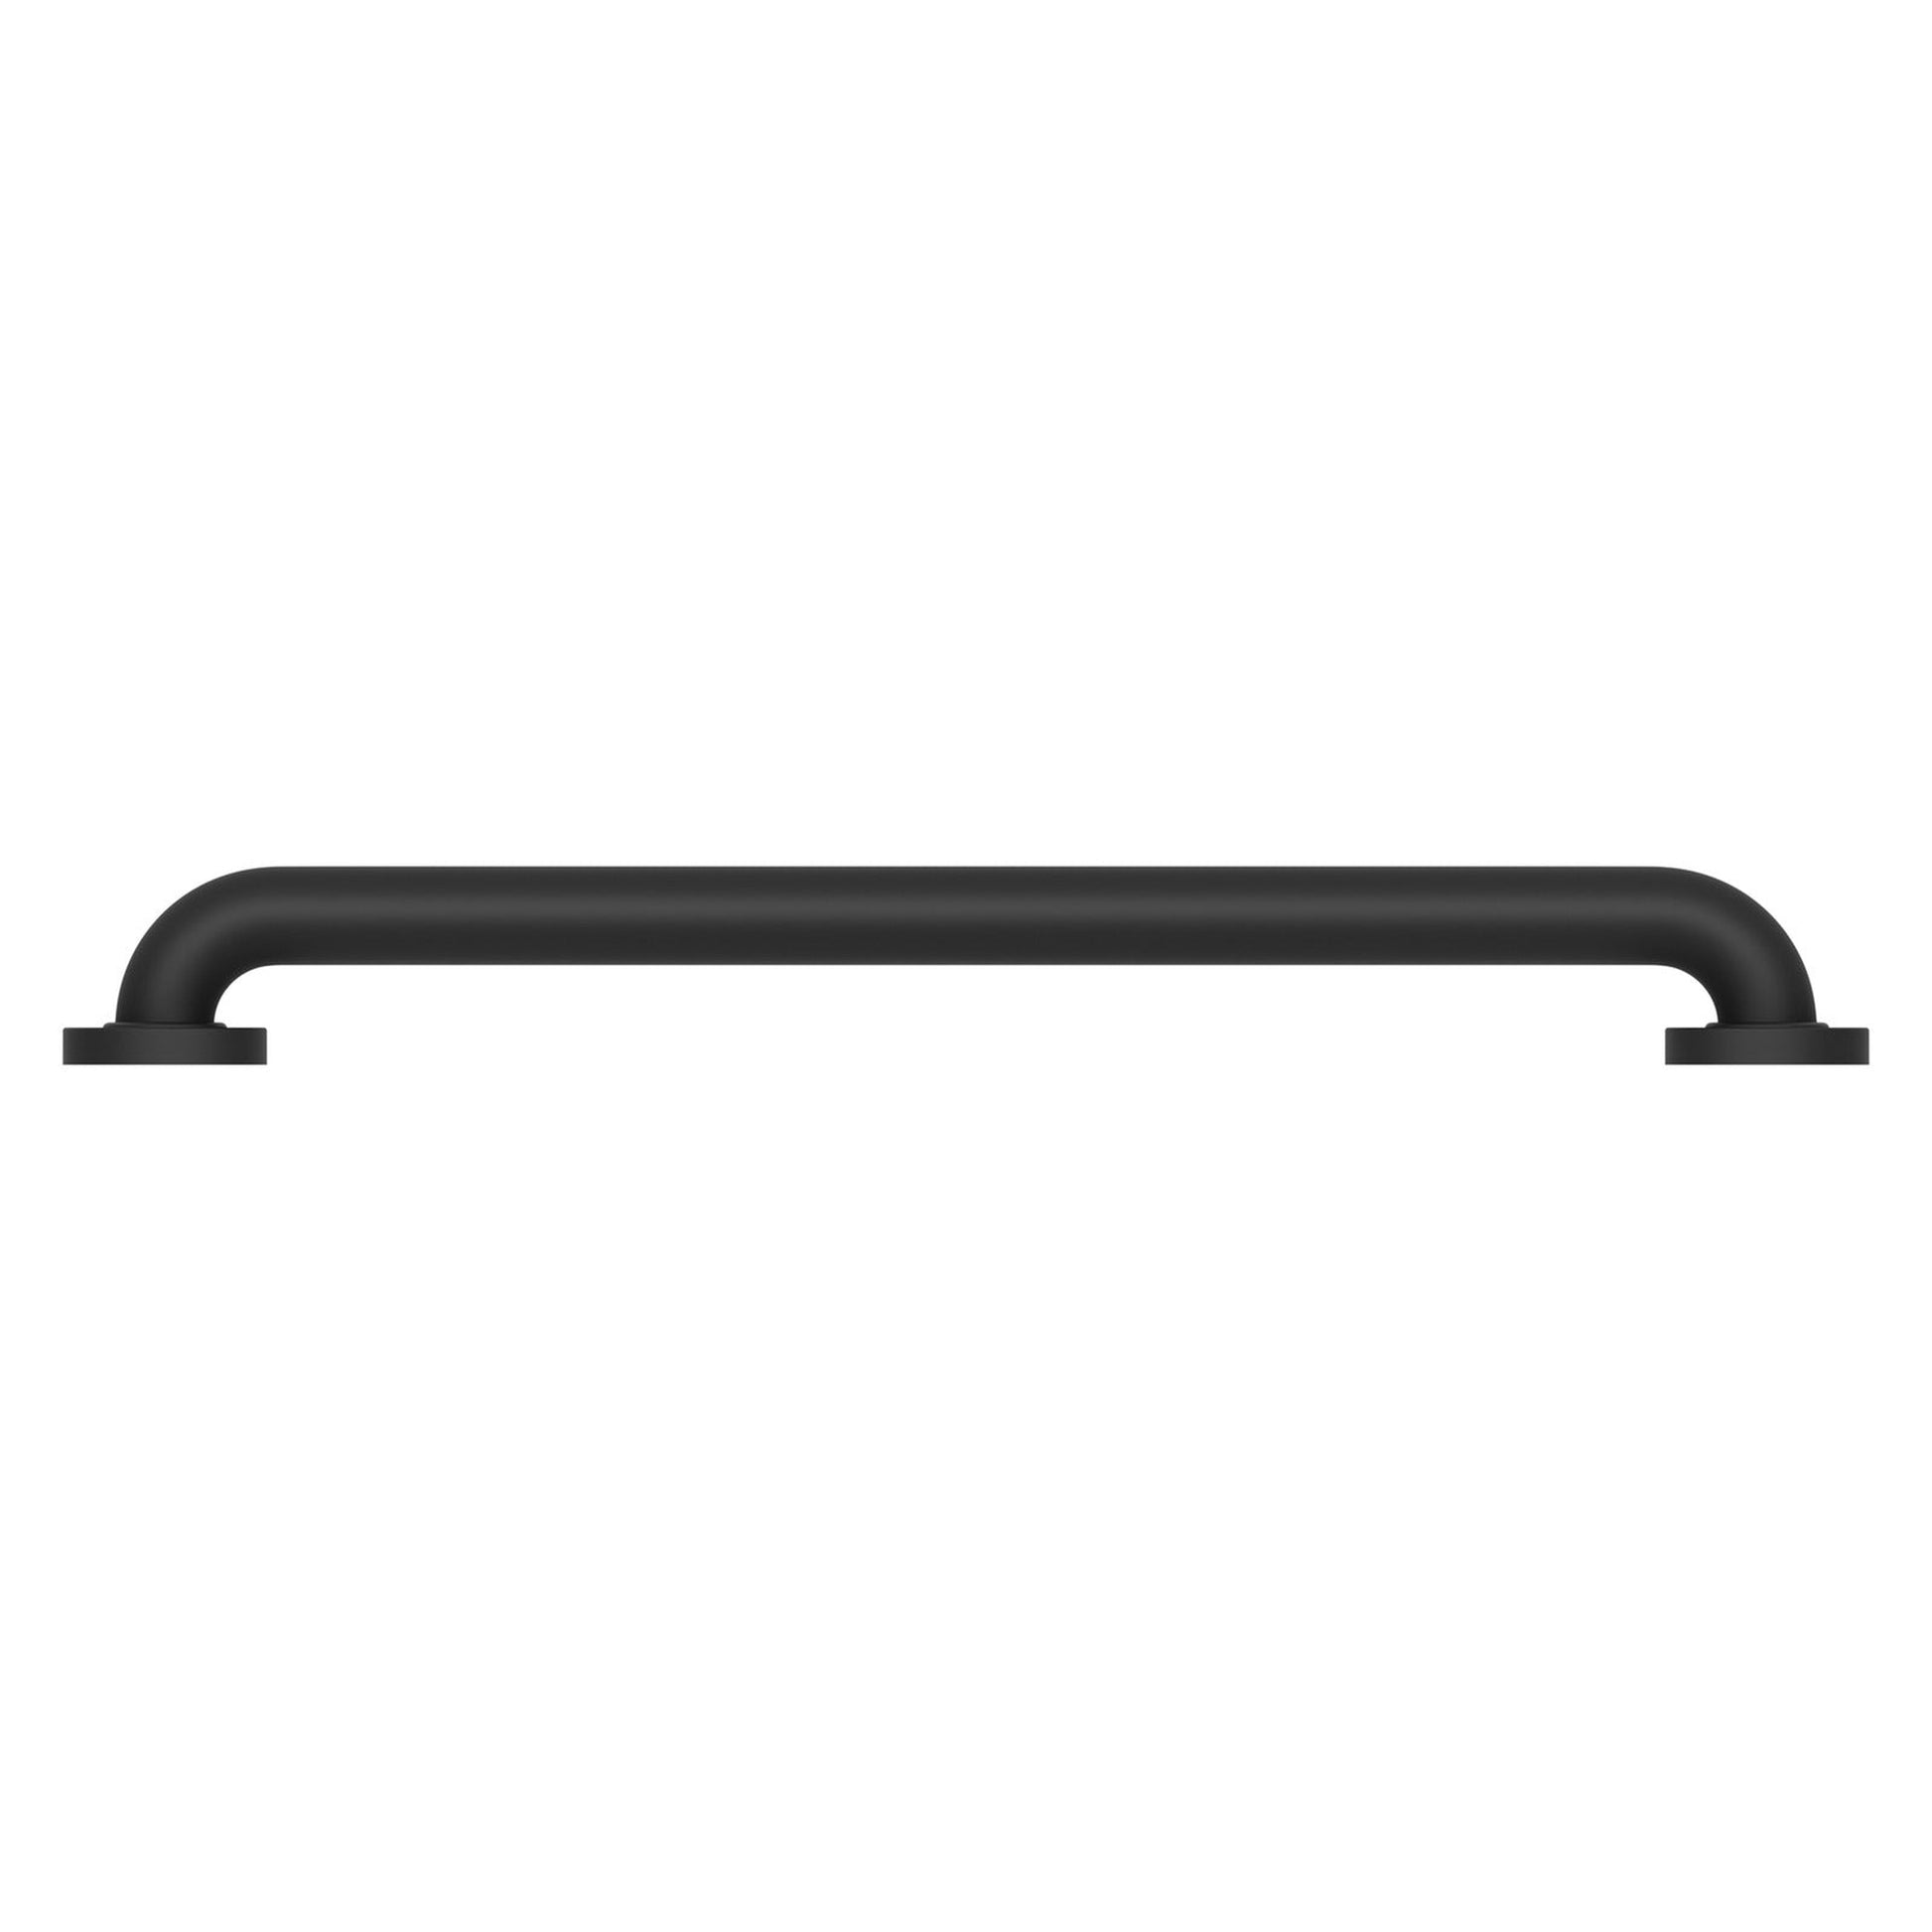 Evekare 24" x 1.5" Stainless Steel Concealed Mount Grab Bar With Comfort Grip Coating in Matte Black